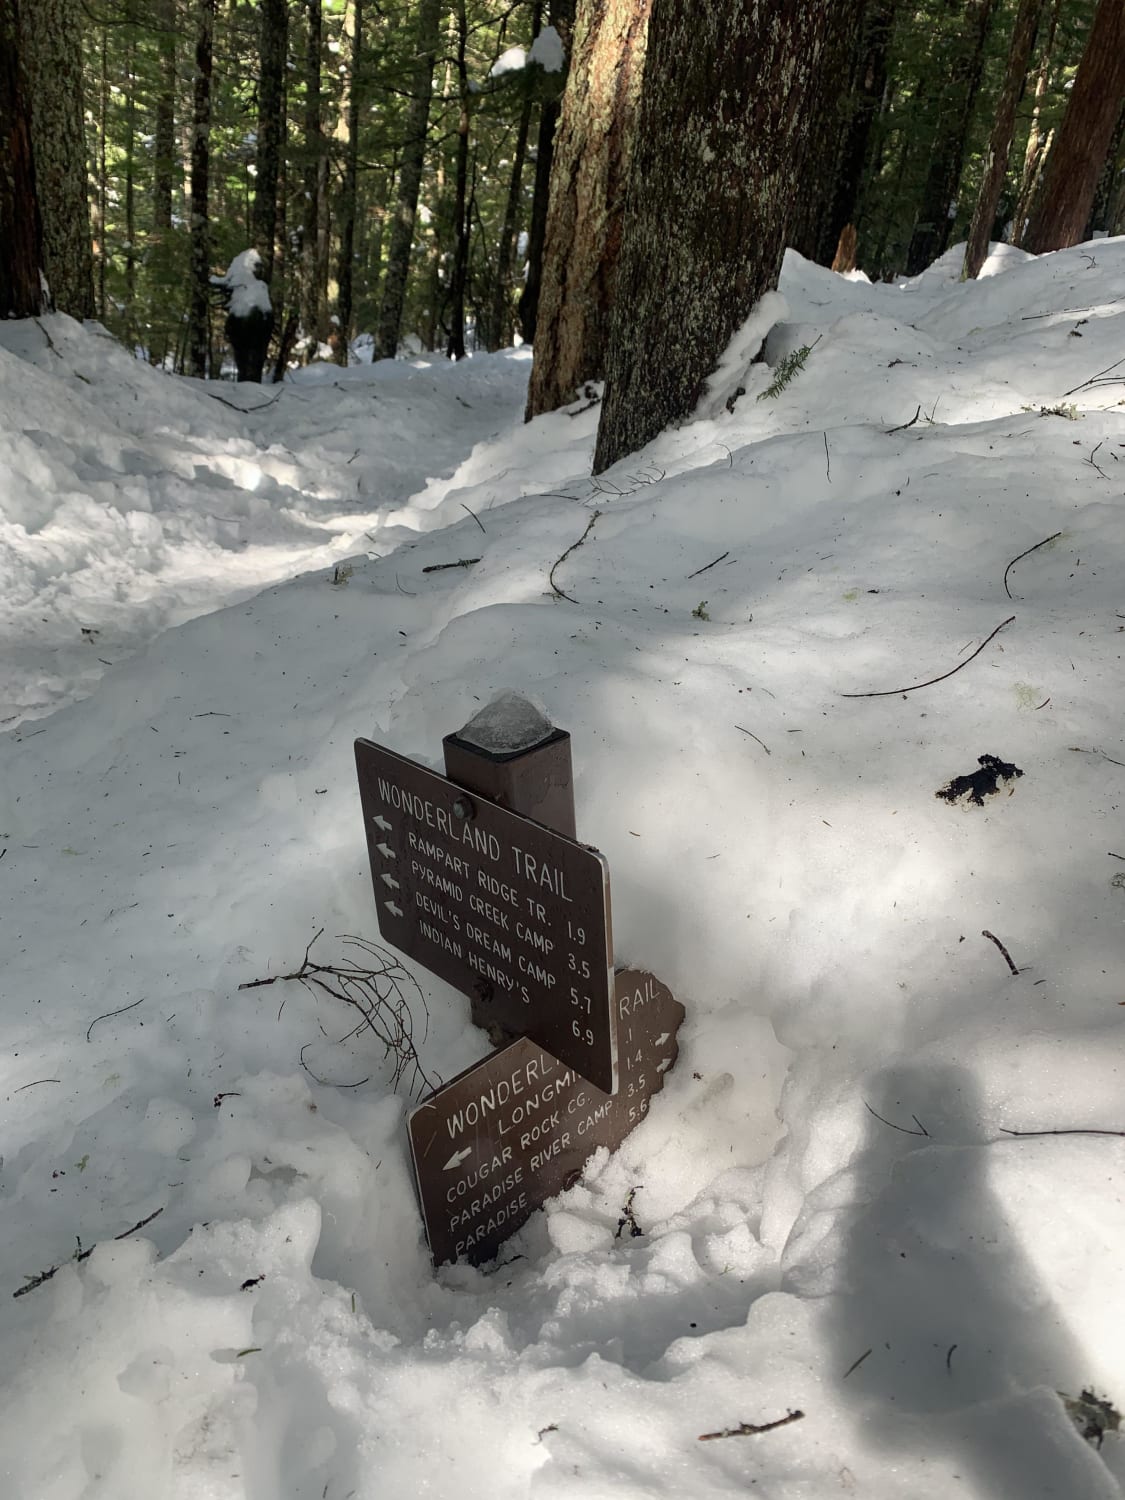 Didn’t realize we were hiking on top of 3 feet of snow until we hit this trailhead. Mount Rainier National Park, US